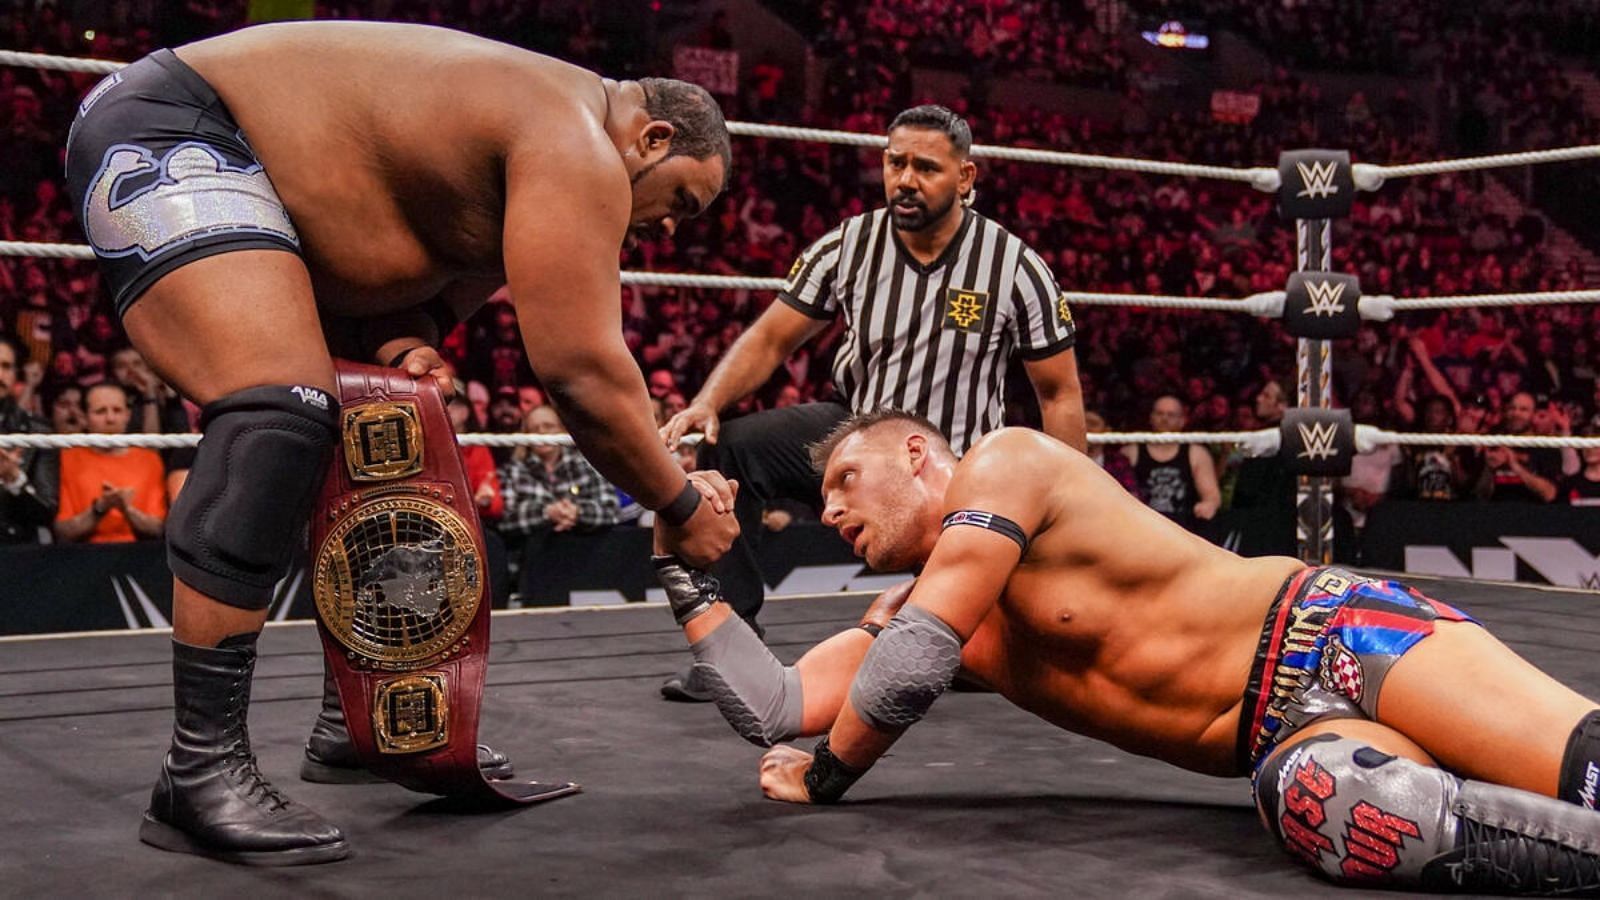 Keith Lee and Dijak are no strangers to each other. [Image credits: WWE Official Website Gallery]